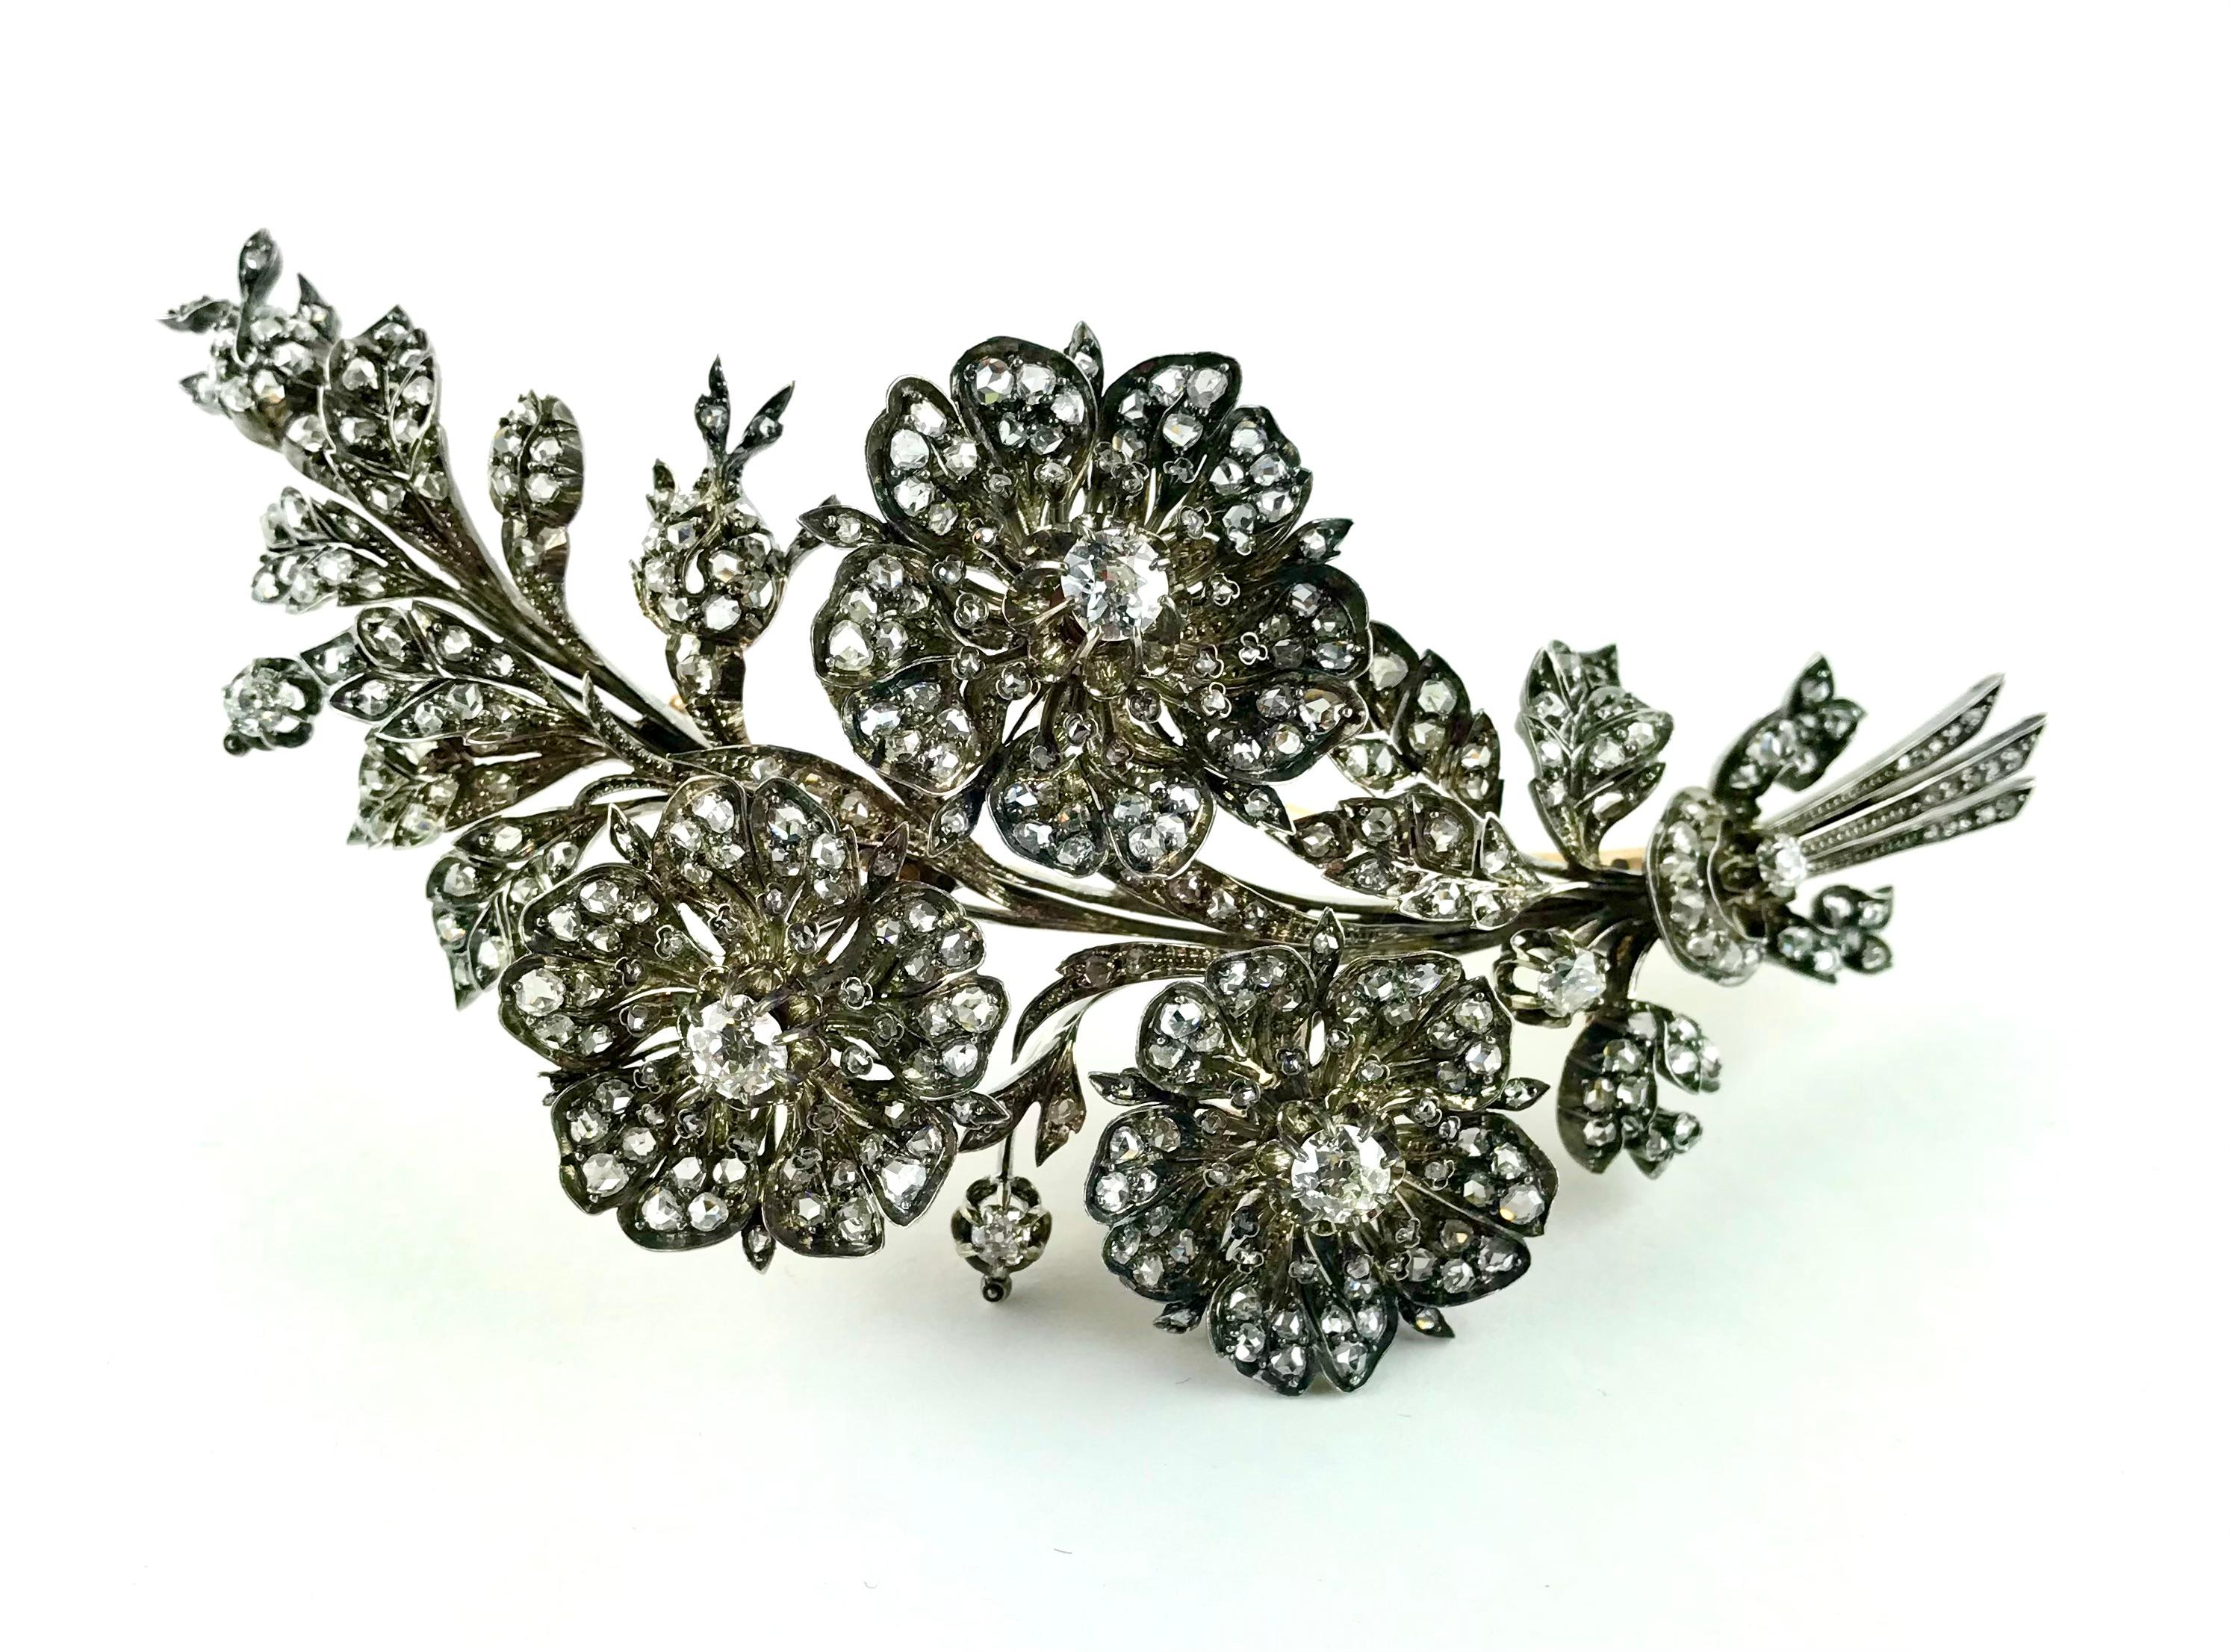 Impressive and eye-catching 1820’s en Tremblant Diamond spray Brooch composed of a branch of three flowers, buds and foliate decorations crafted in Paris in 18k Gold and Silver. The old mine cut Diamonds are set throughout the petals and leaves of